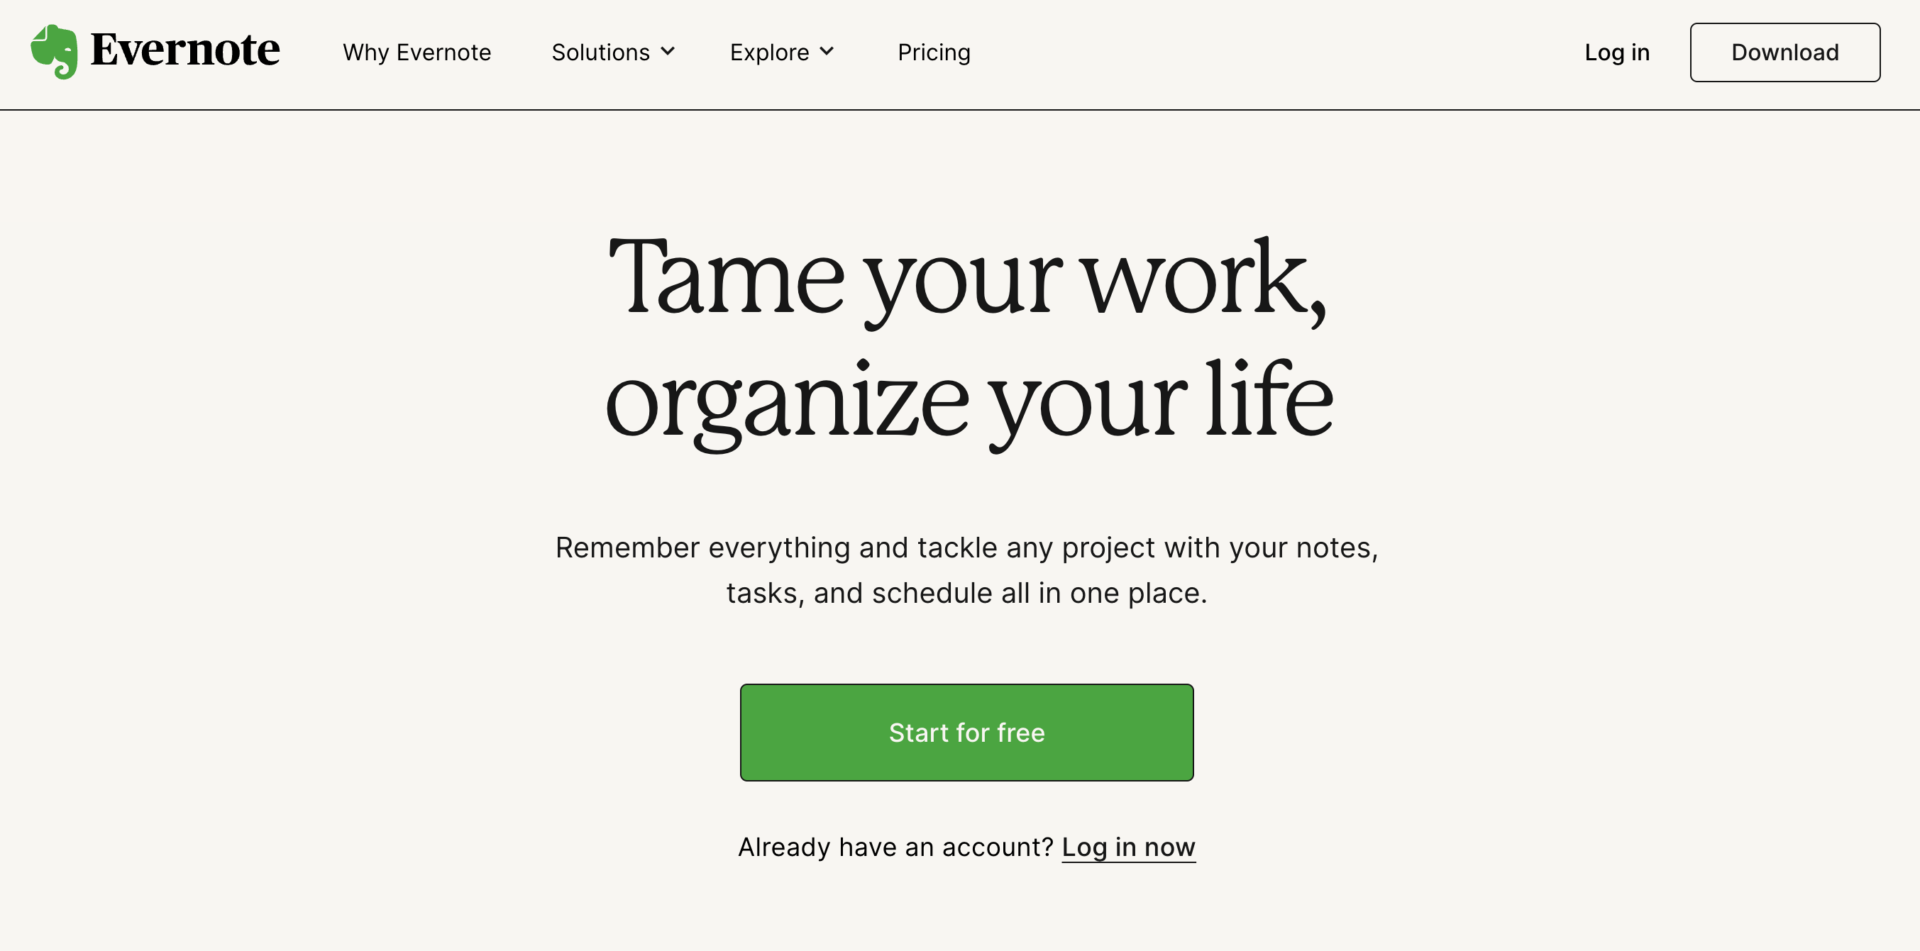 Image of top page of Evernote